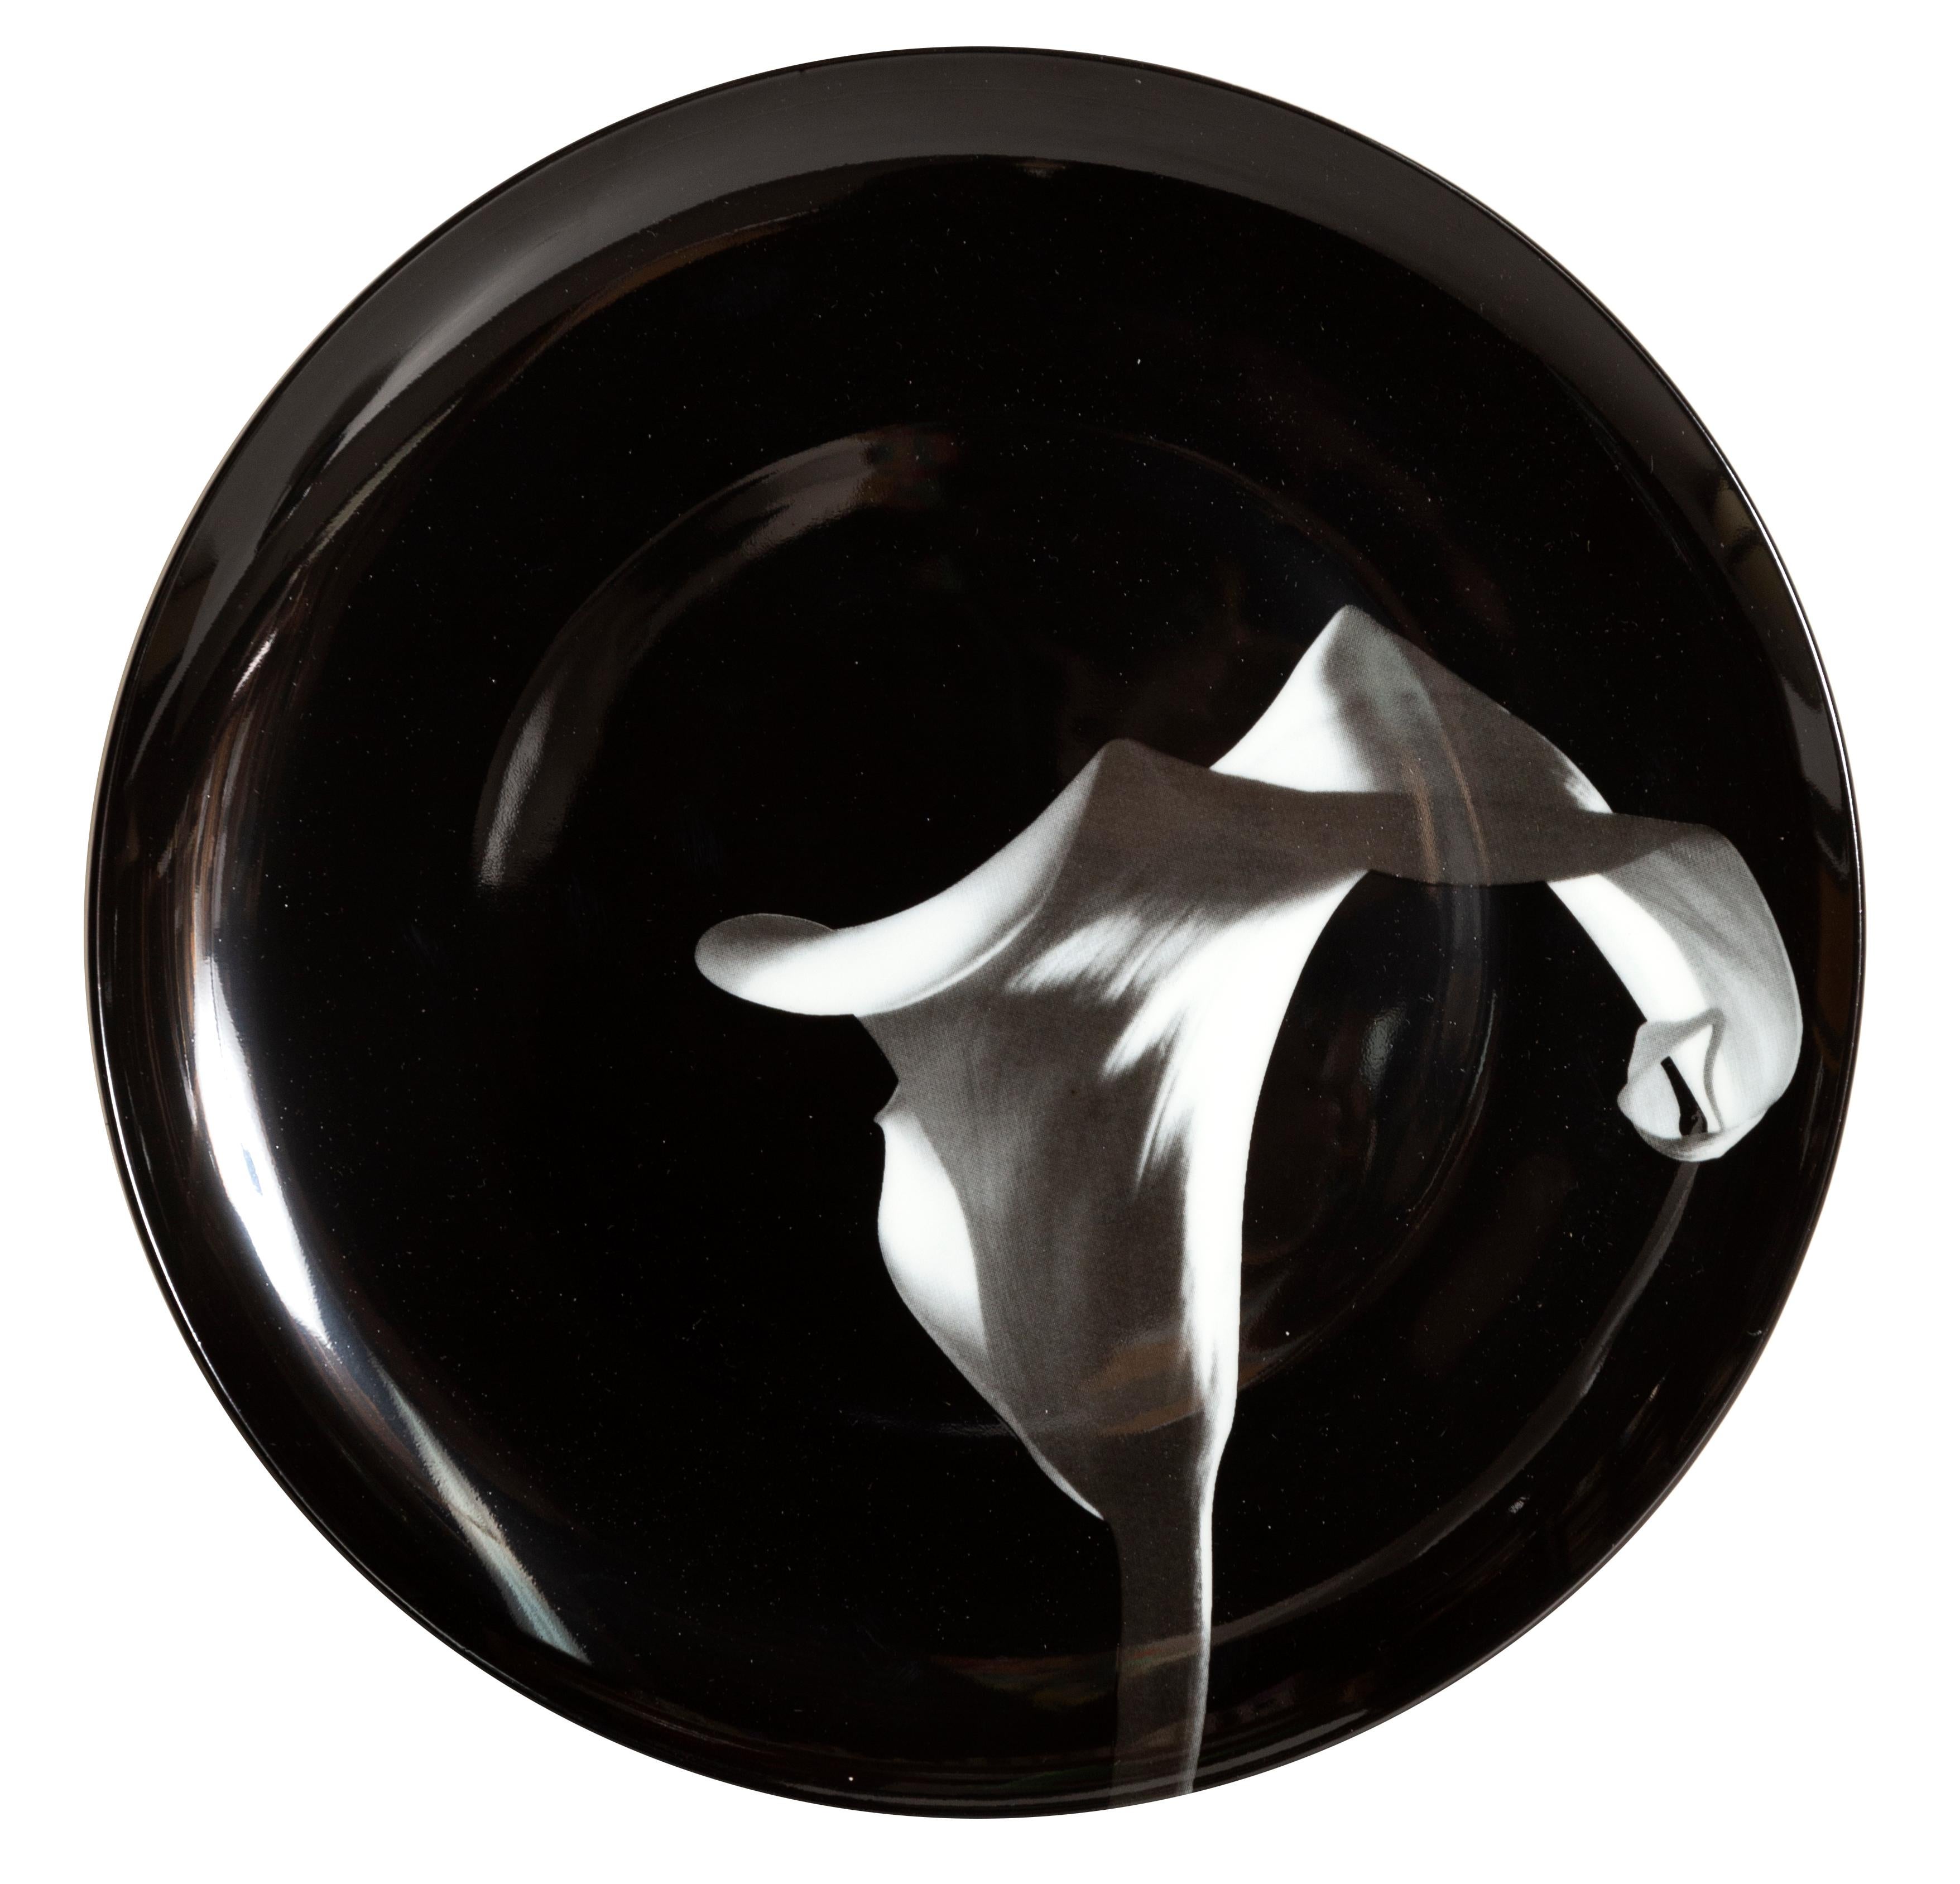 Unknown Still-Life Photograph - Robert Mapplethorpe, Calla Lily Porcelain Plate